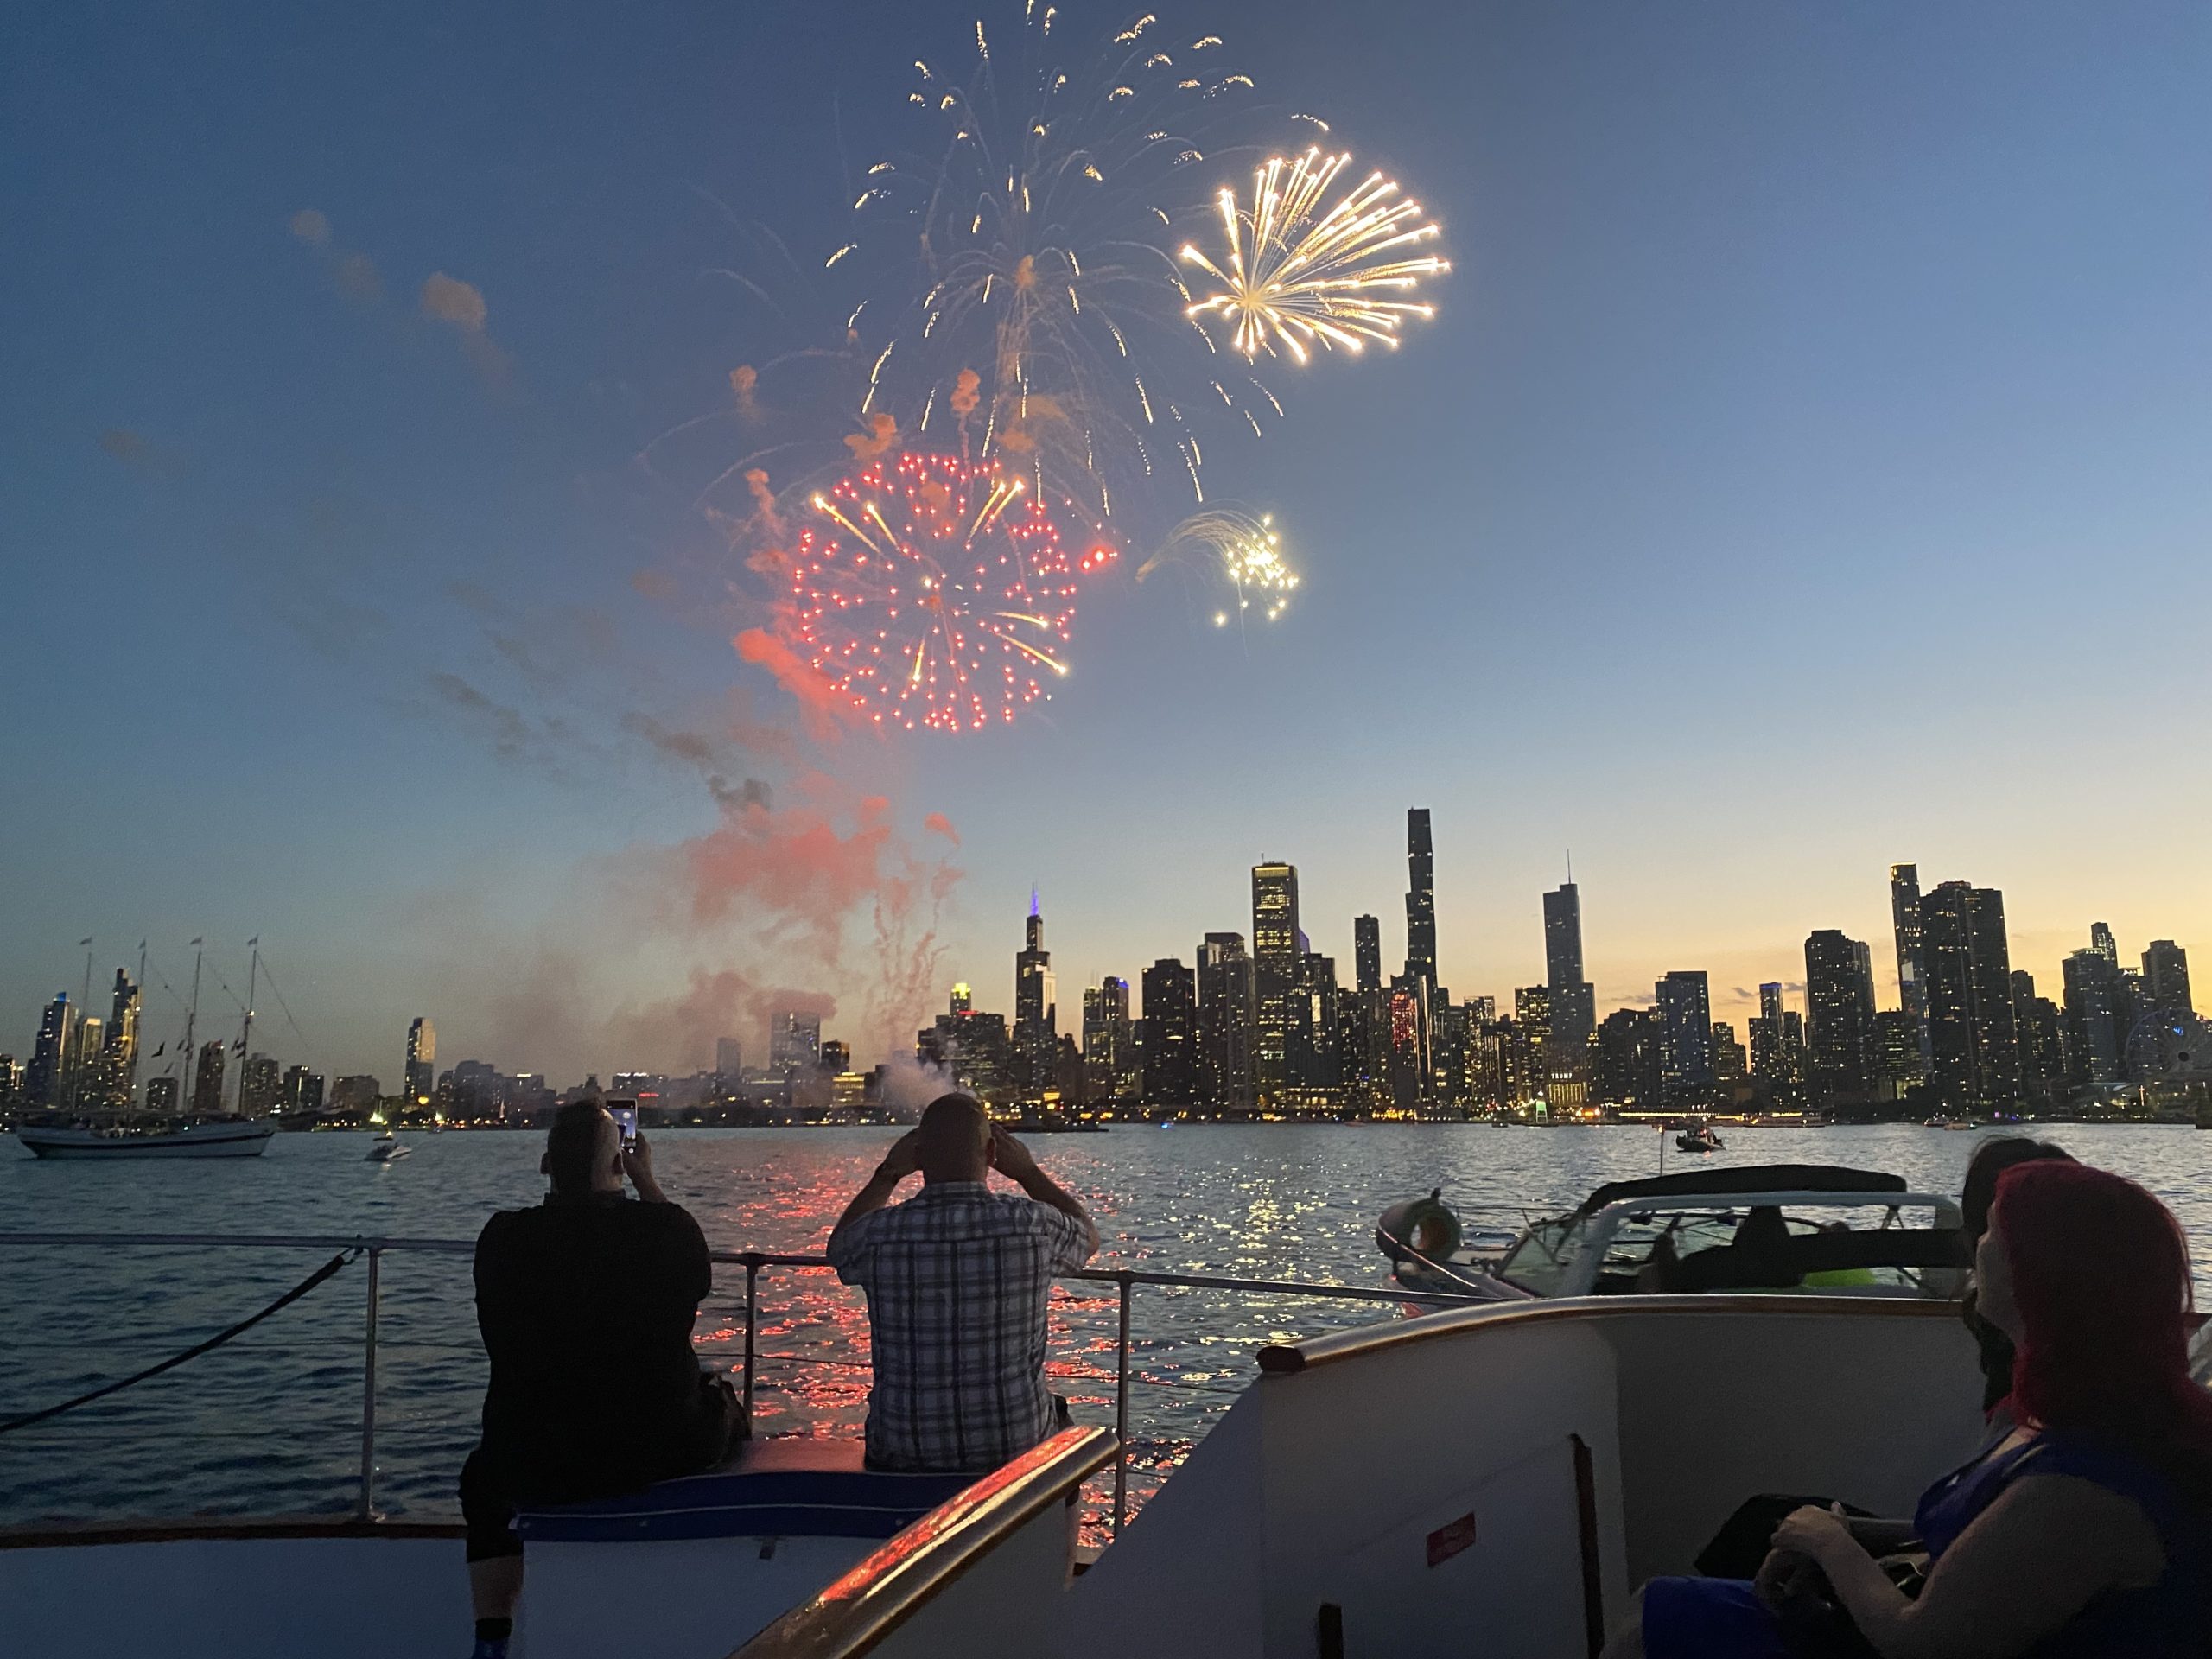 Embrace the Magic of Weekly Fireworks with Free Spirit Yacht Cruises